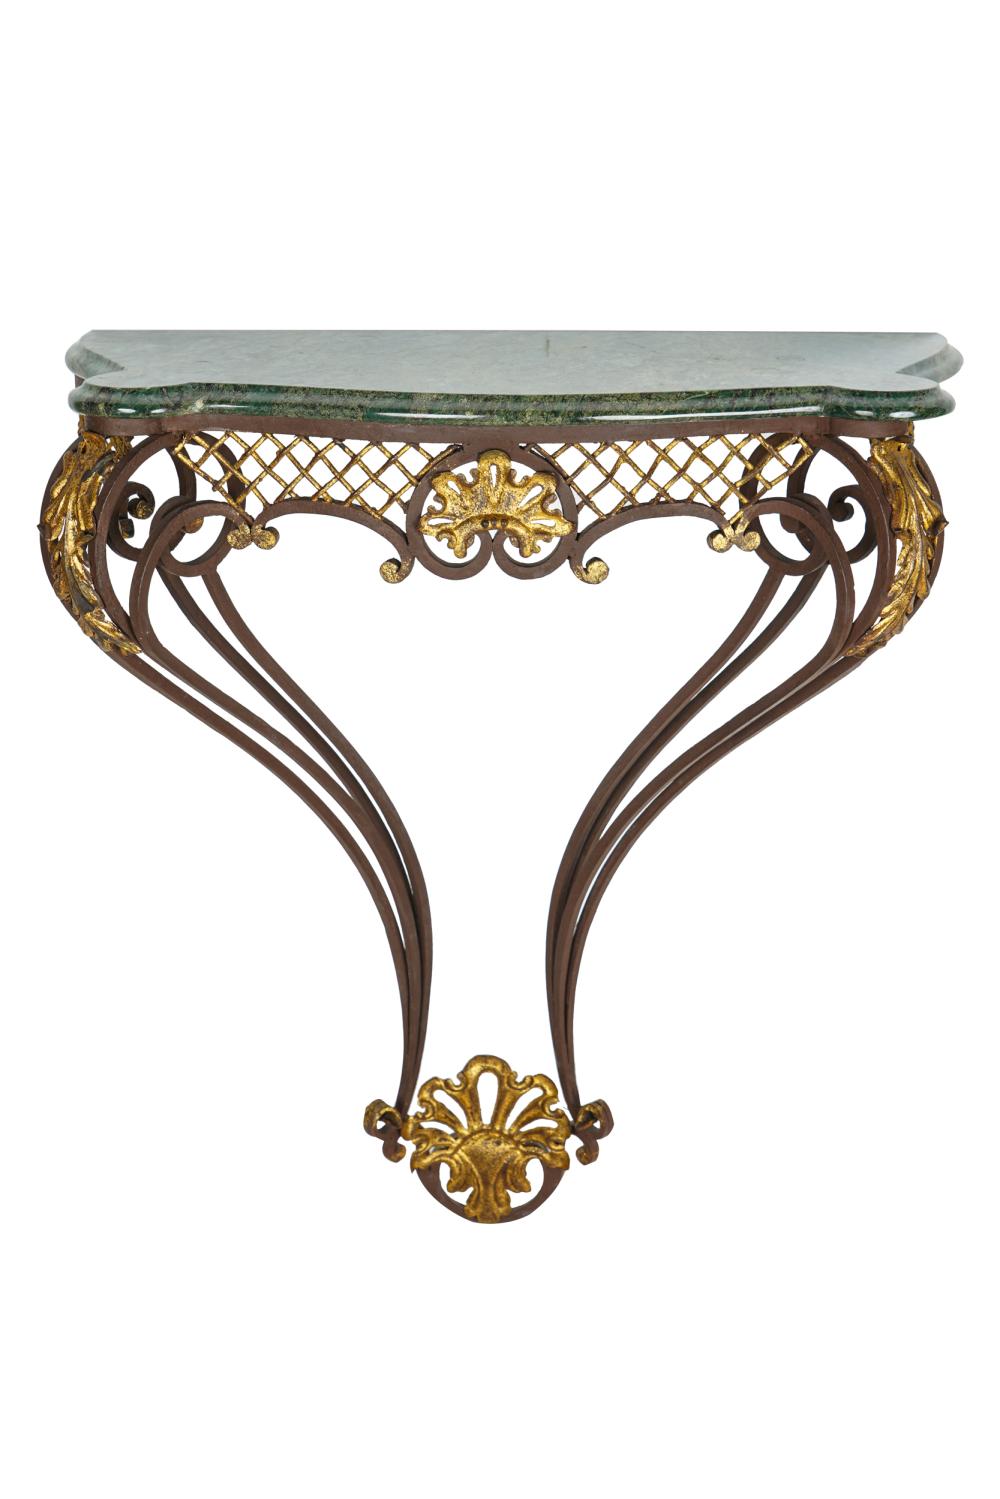 MARBLE IRON GILT METAL CONSOLE20th 33236c